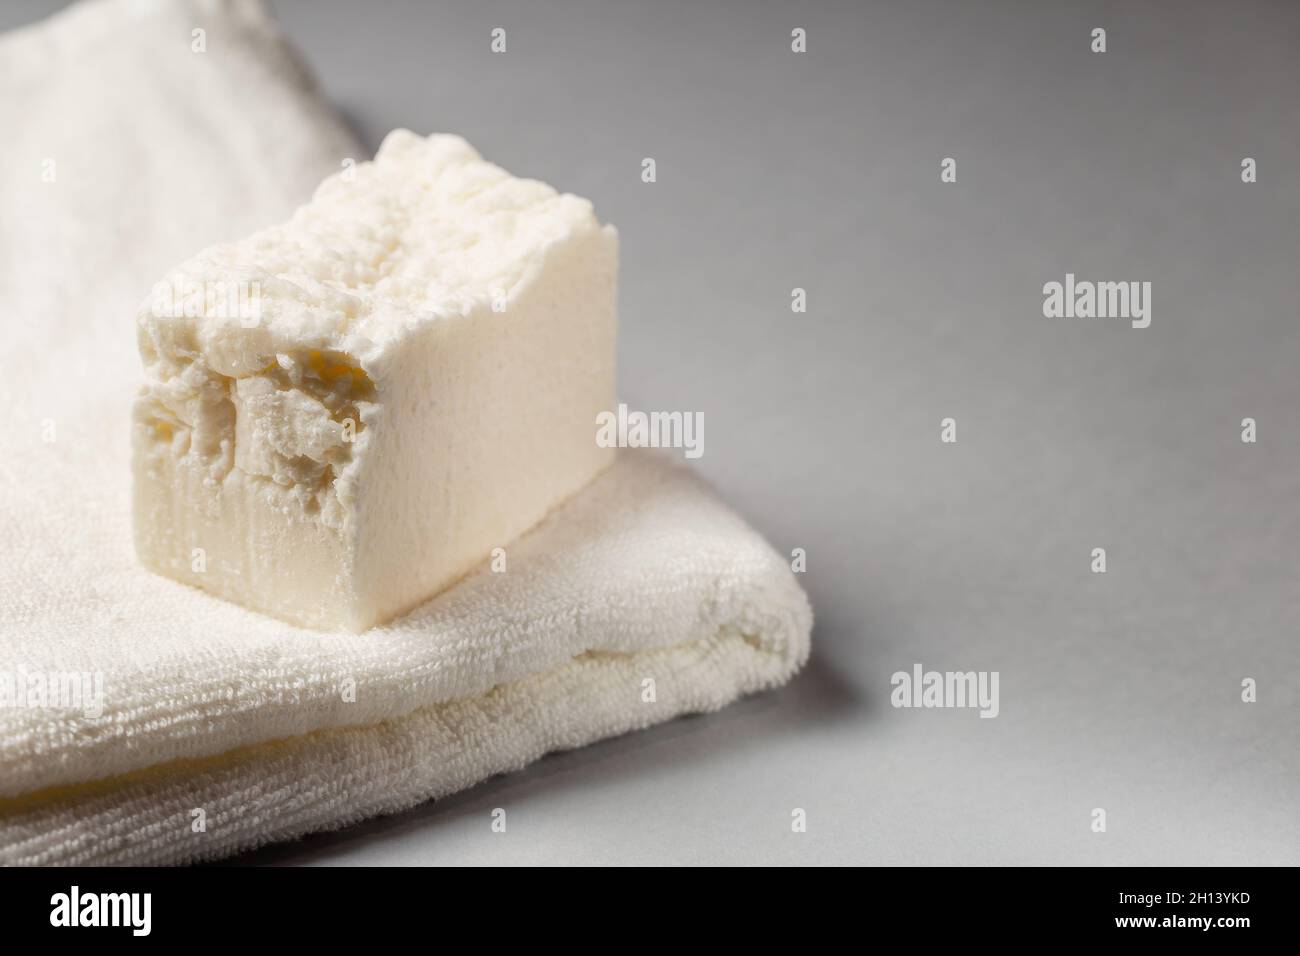 Homemade laundry detergent. Washing solid soap bar. Eco-friendly Sustainable lifestyle concept Stock Photo